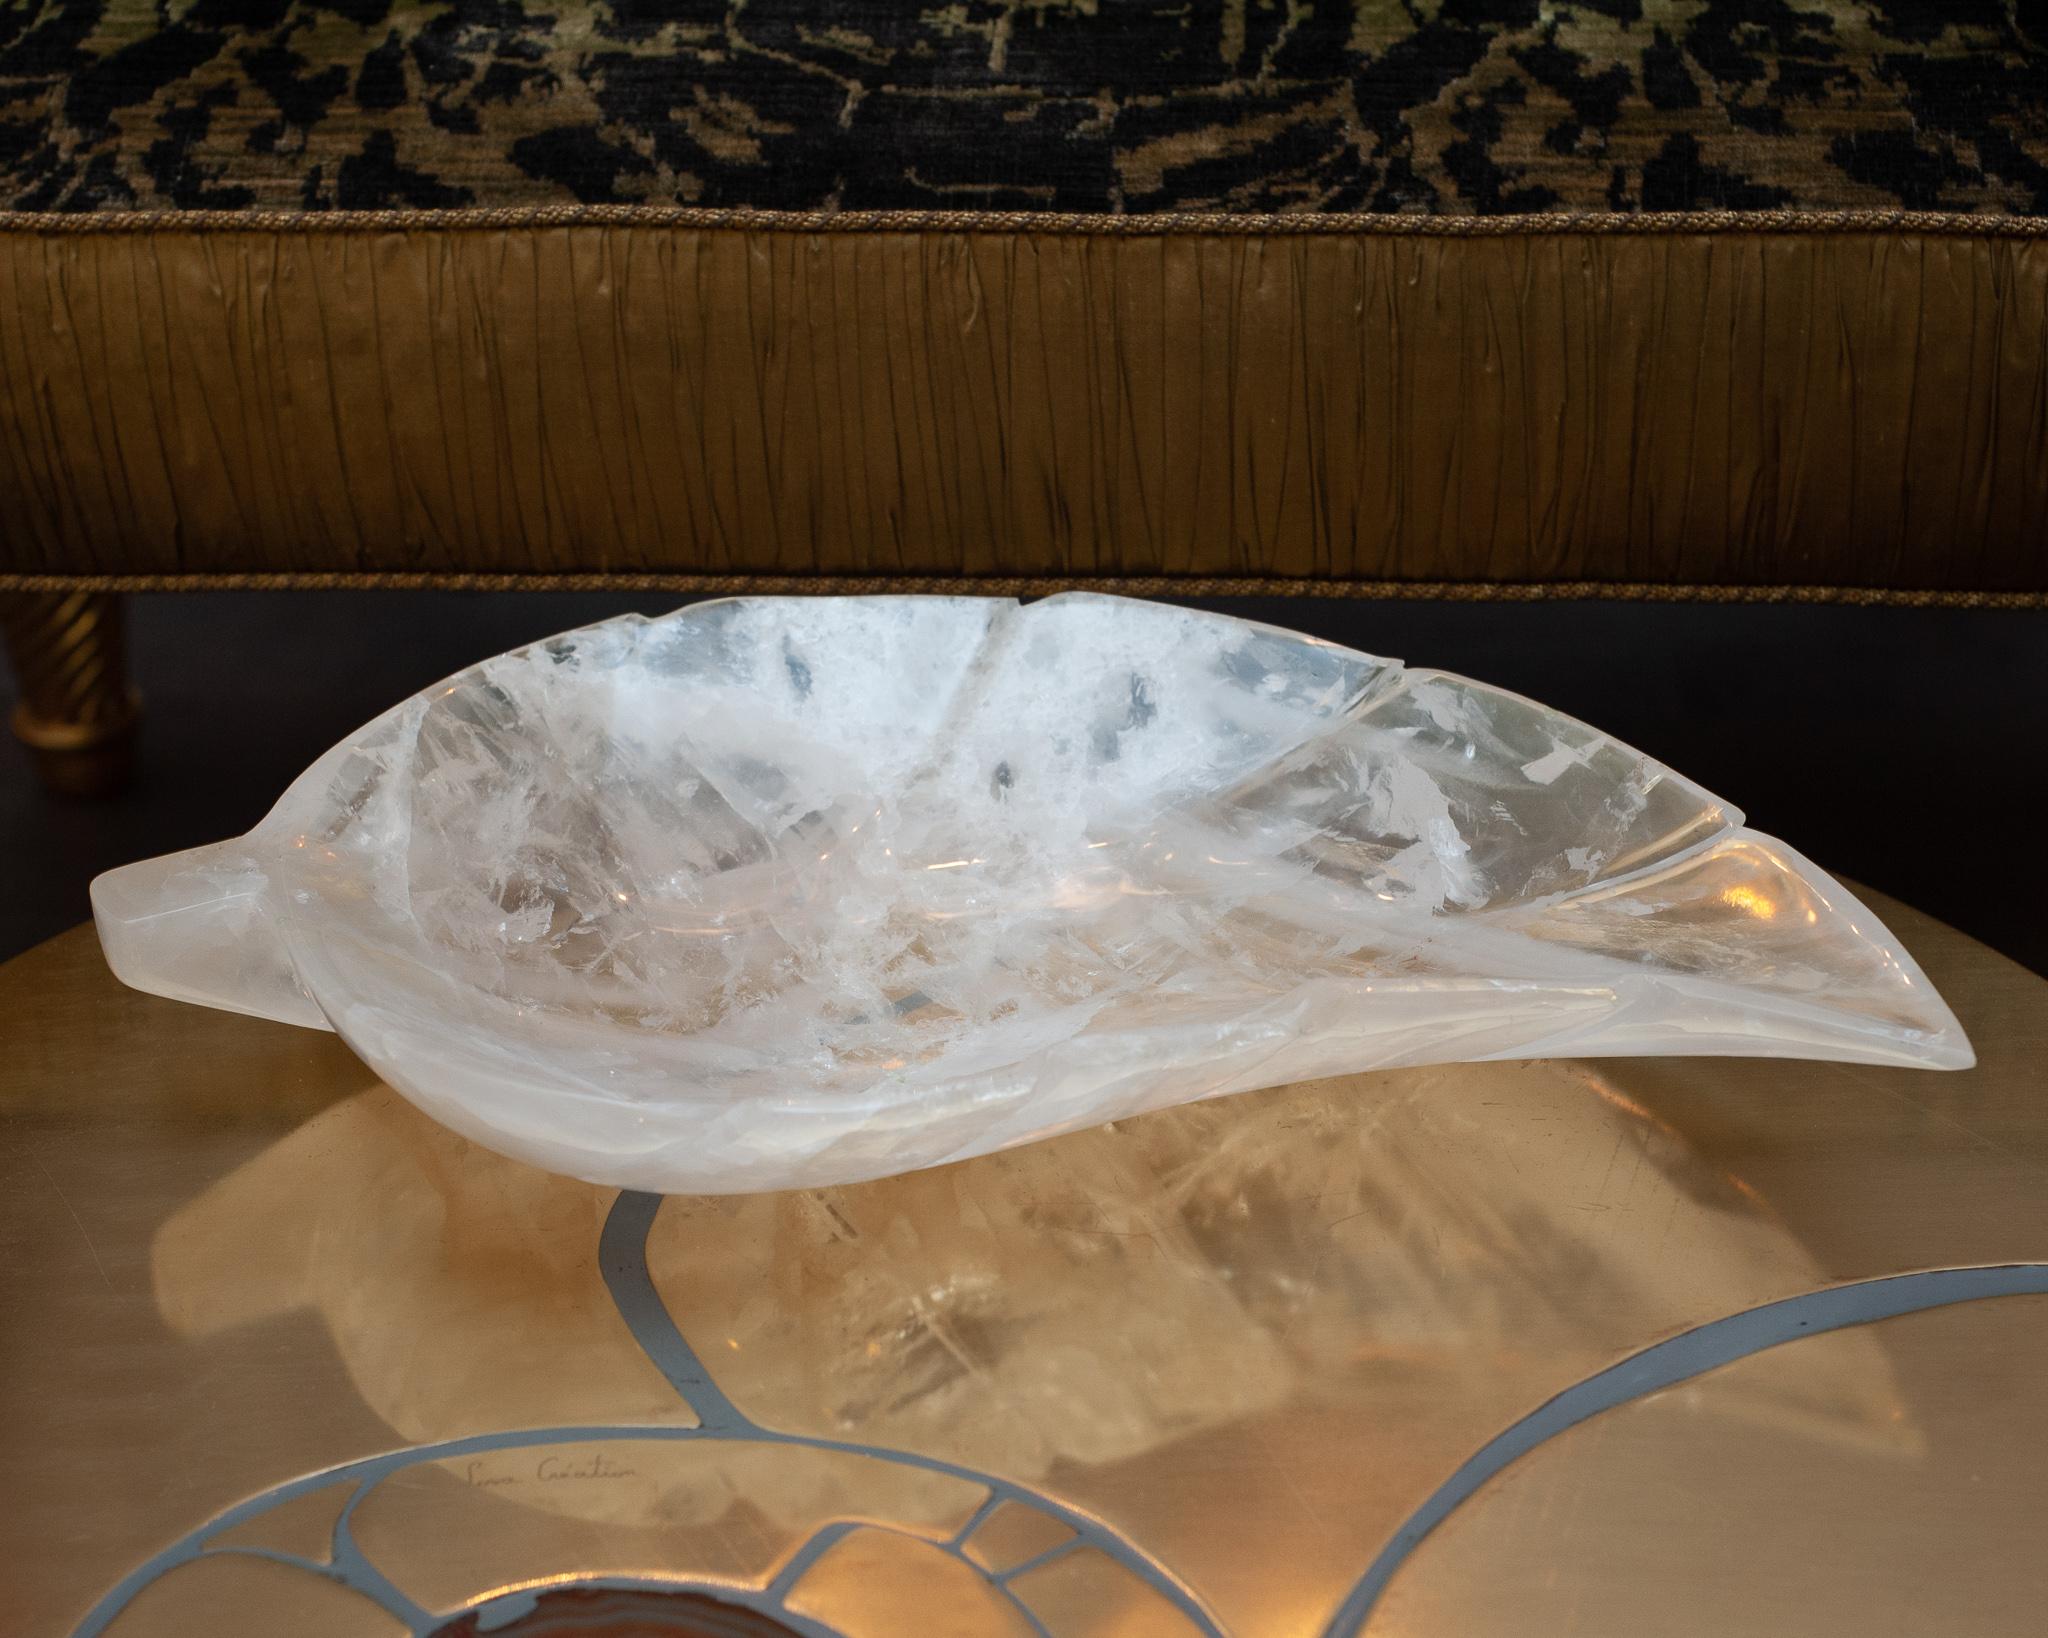 A beautiful large scale hand carved leaf tray in natural, clear rock crystal quartz. Finely carved from a super clear quality of rock crystal and polished to a brilliant high gloss finish. A stunning accessory for any tabletop. Hand carved in Minas